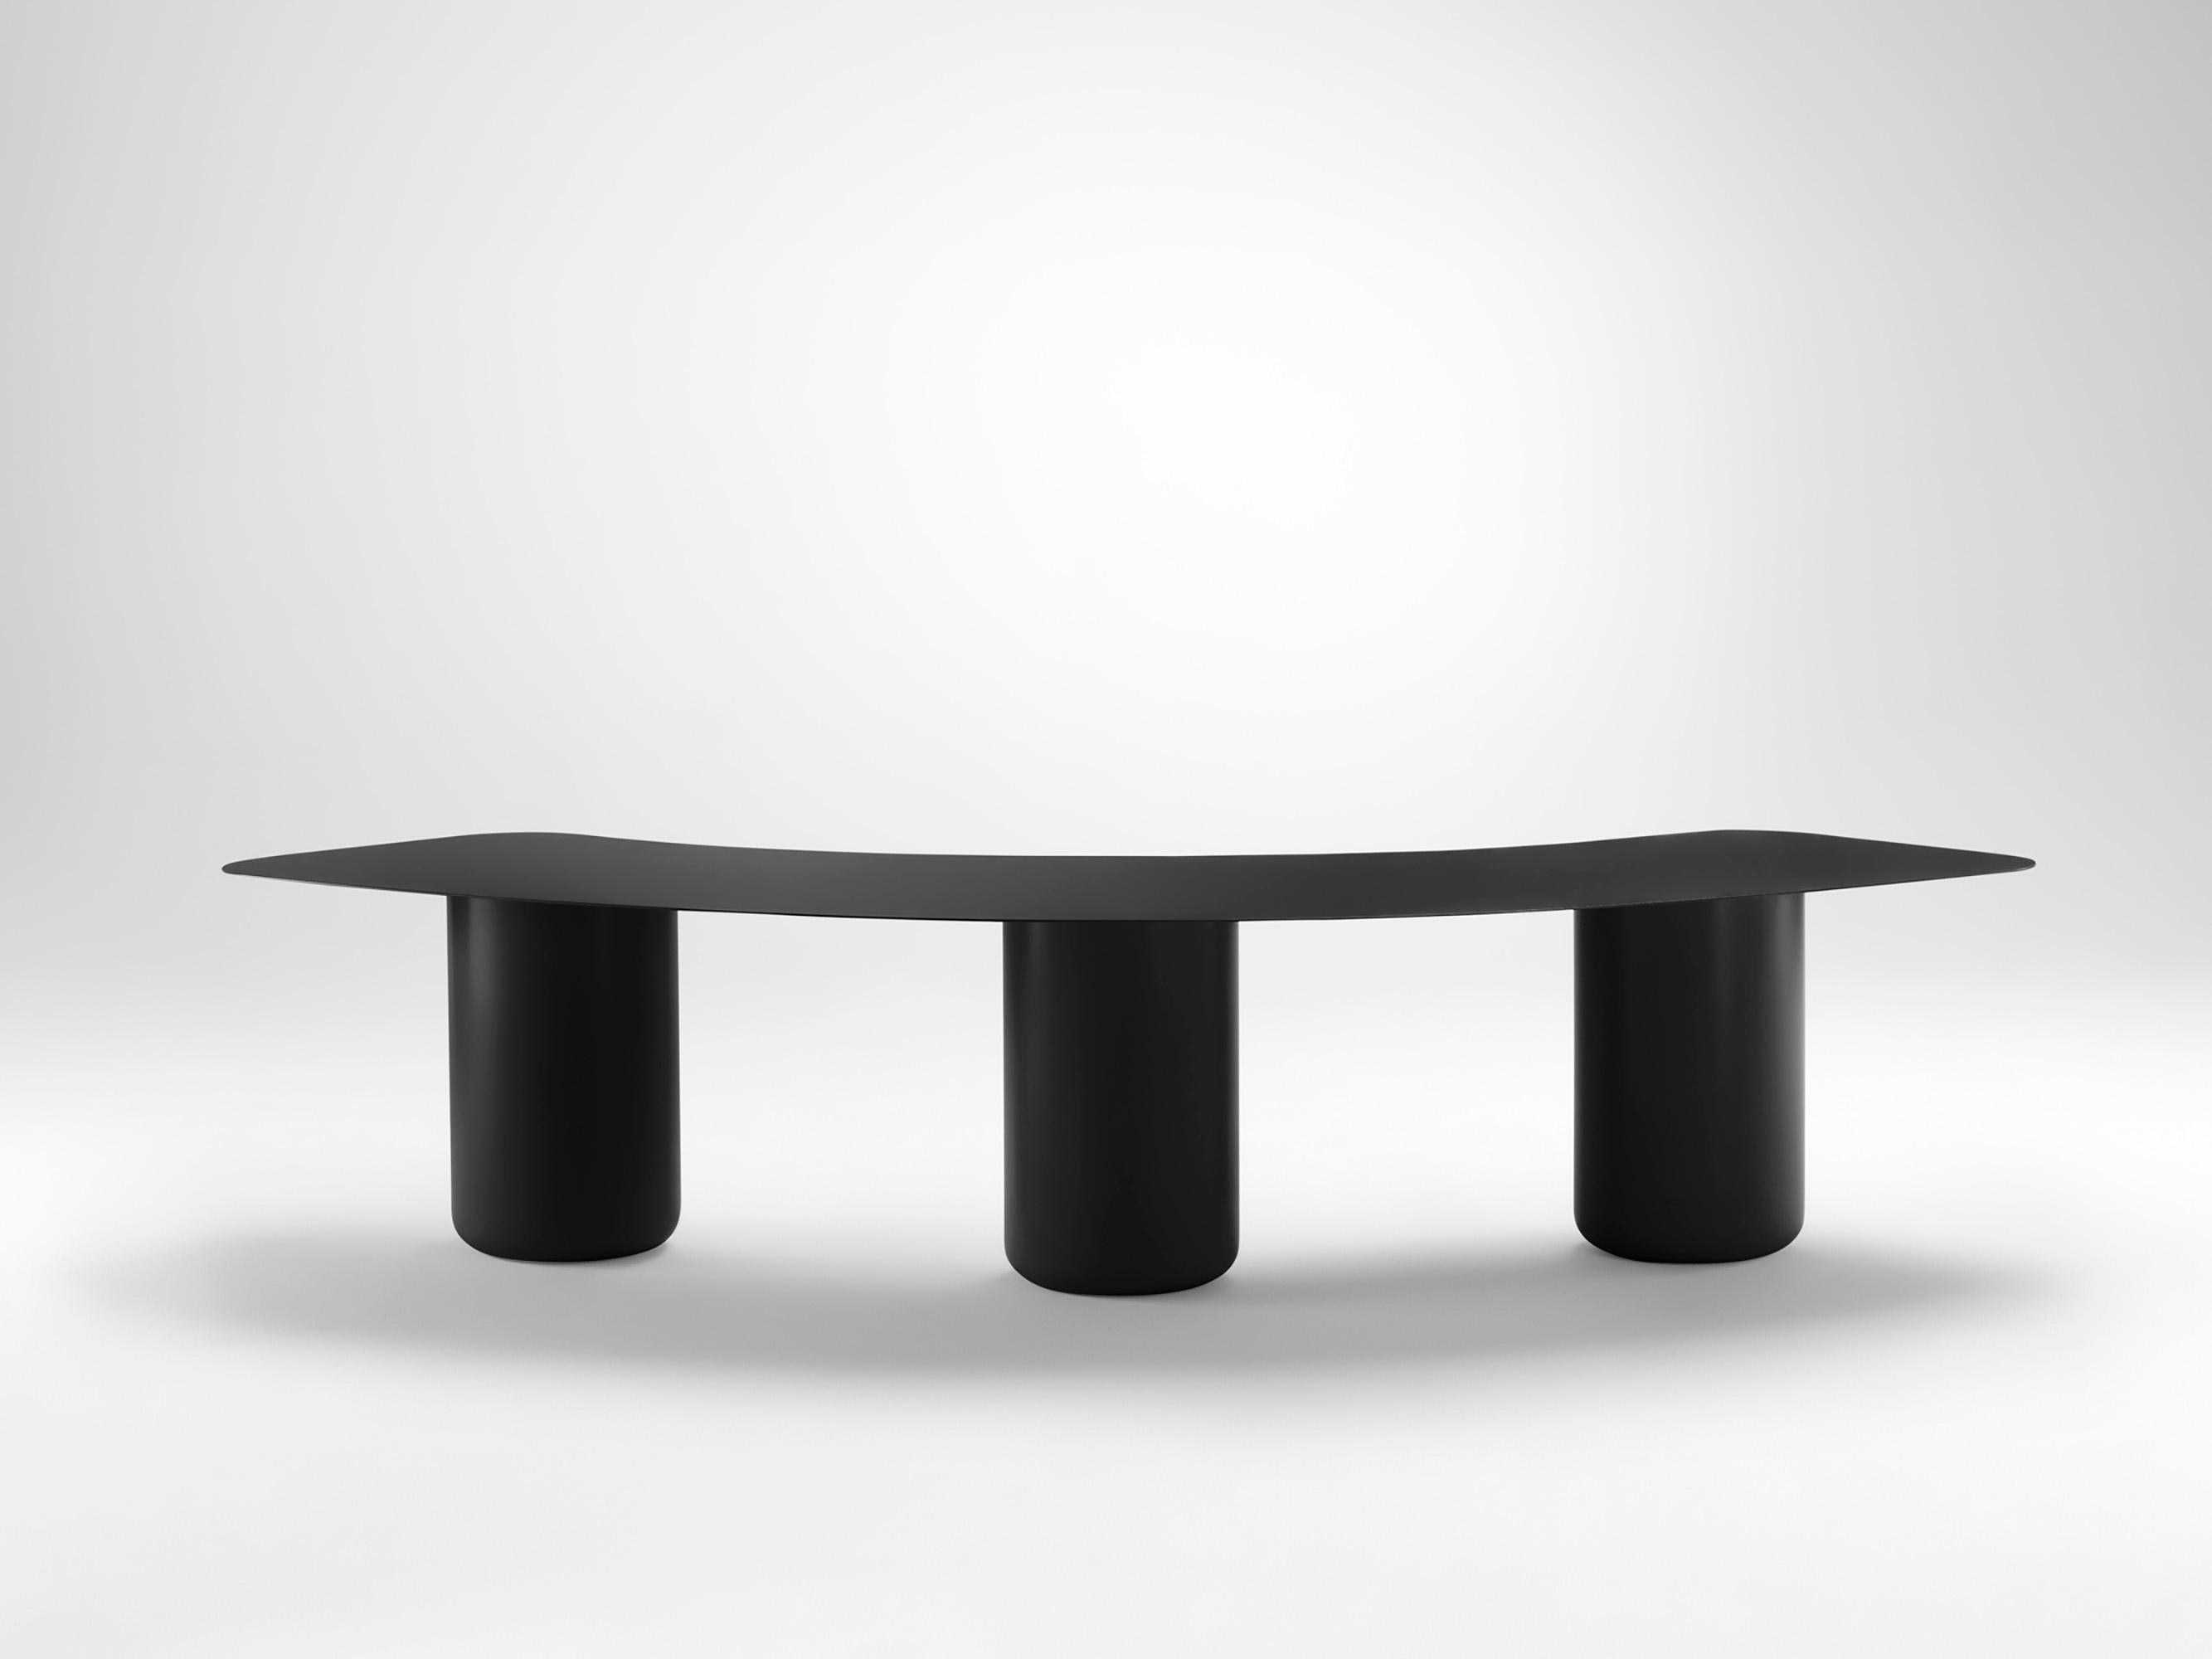 Large Black Curved Bench by Coco Flip
Dimensions: D 75 x W 200 x H 42 cm
Materials: Mild steel, powder-coated with zinc undercoat. 
Weight: 44 kg

Coco Flip is a Melbourne based furniture and lighting design studio, run by us, Kate Stokes and